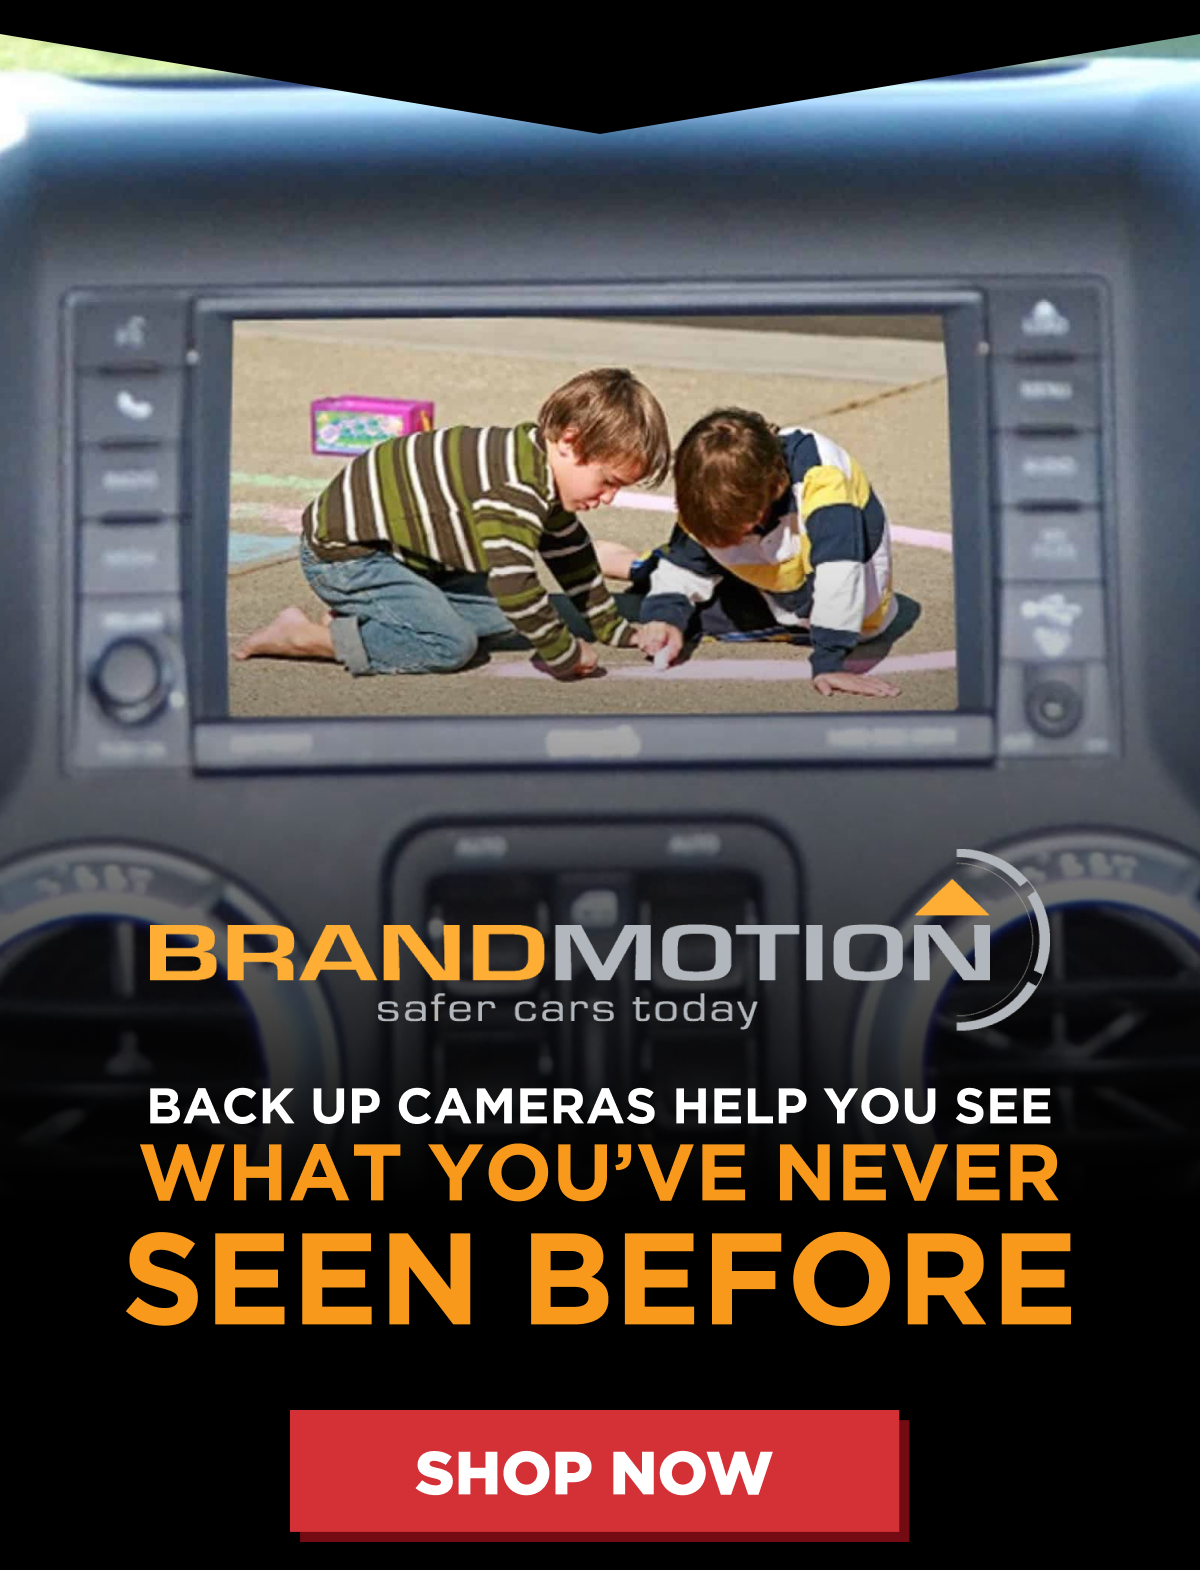 Brandmotion’s Back Up Cameras Help You See What You’ve Never Seen Before